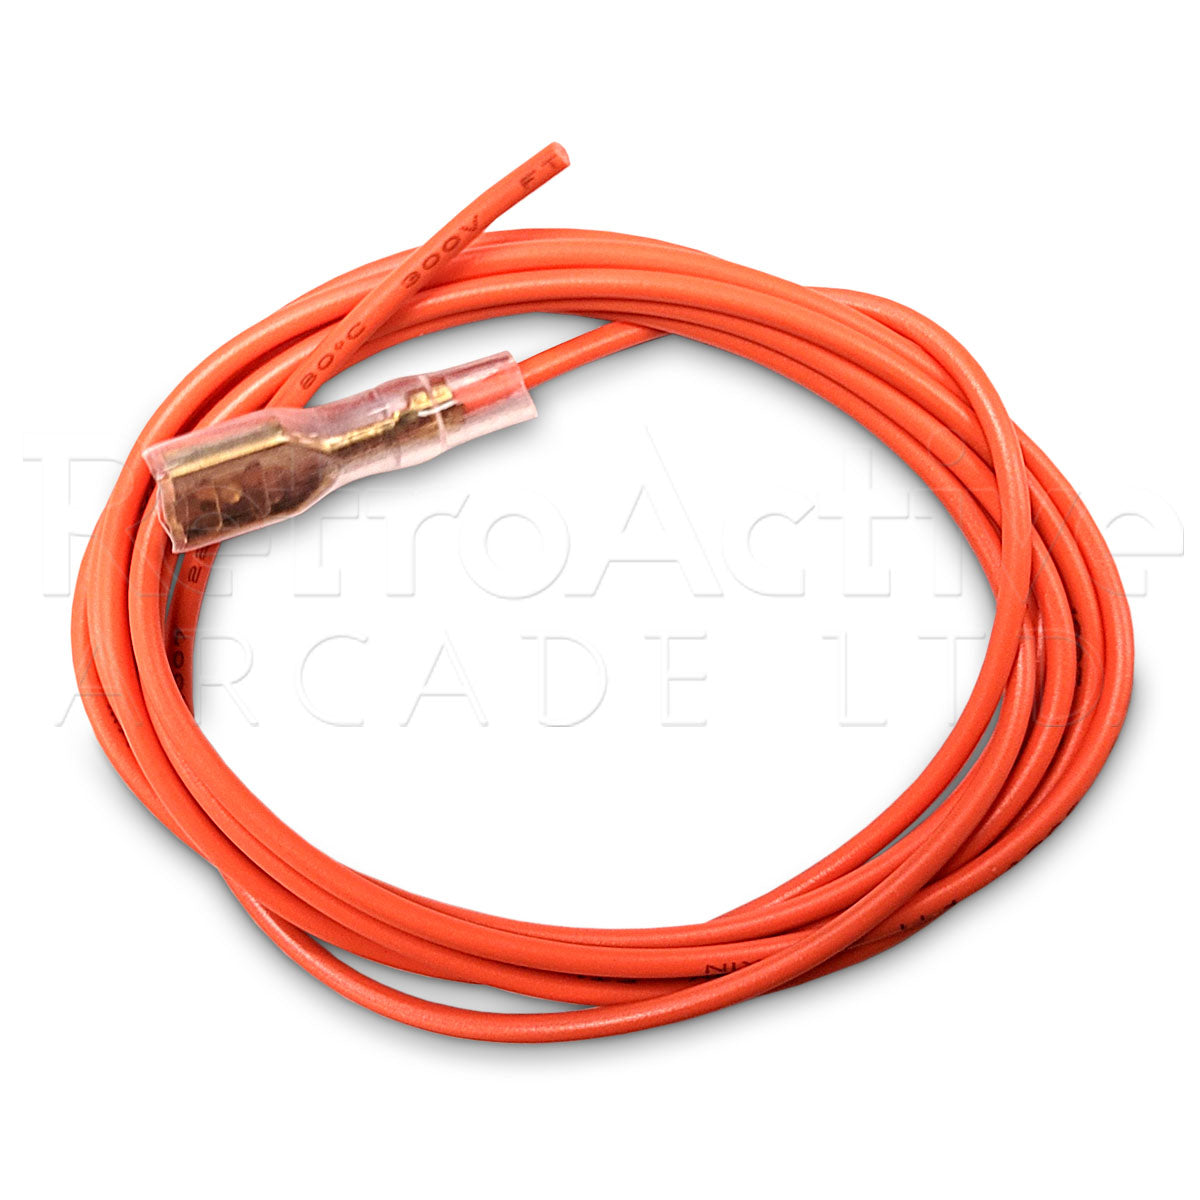 1 Meter Wire with .187" Connector - Orange Wiring & Harnesses Universal - Retro Active Arcade